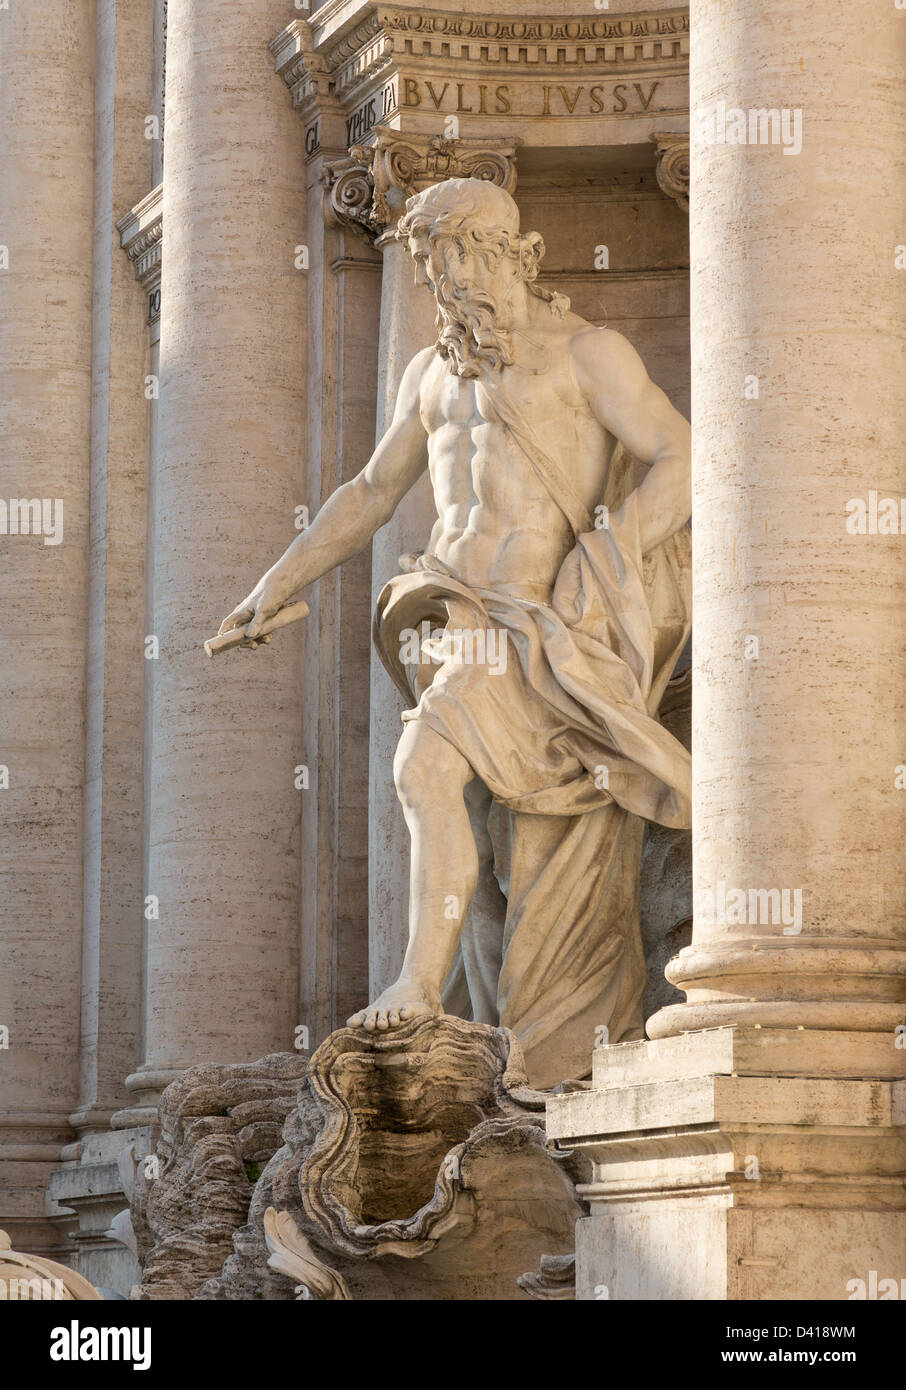 Details of statues in Trevi fountain in Rome Italy Stock Photo